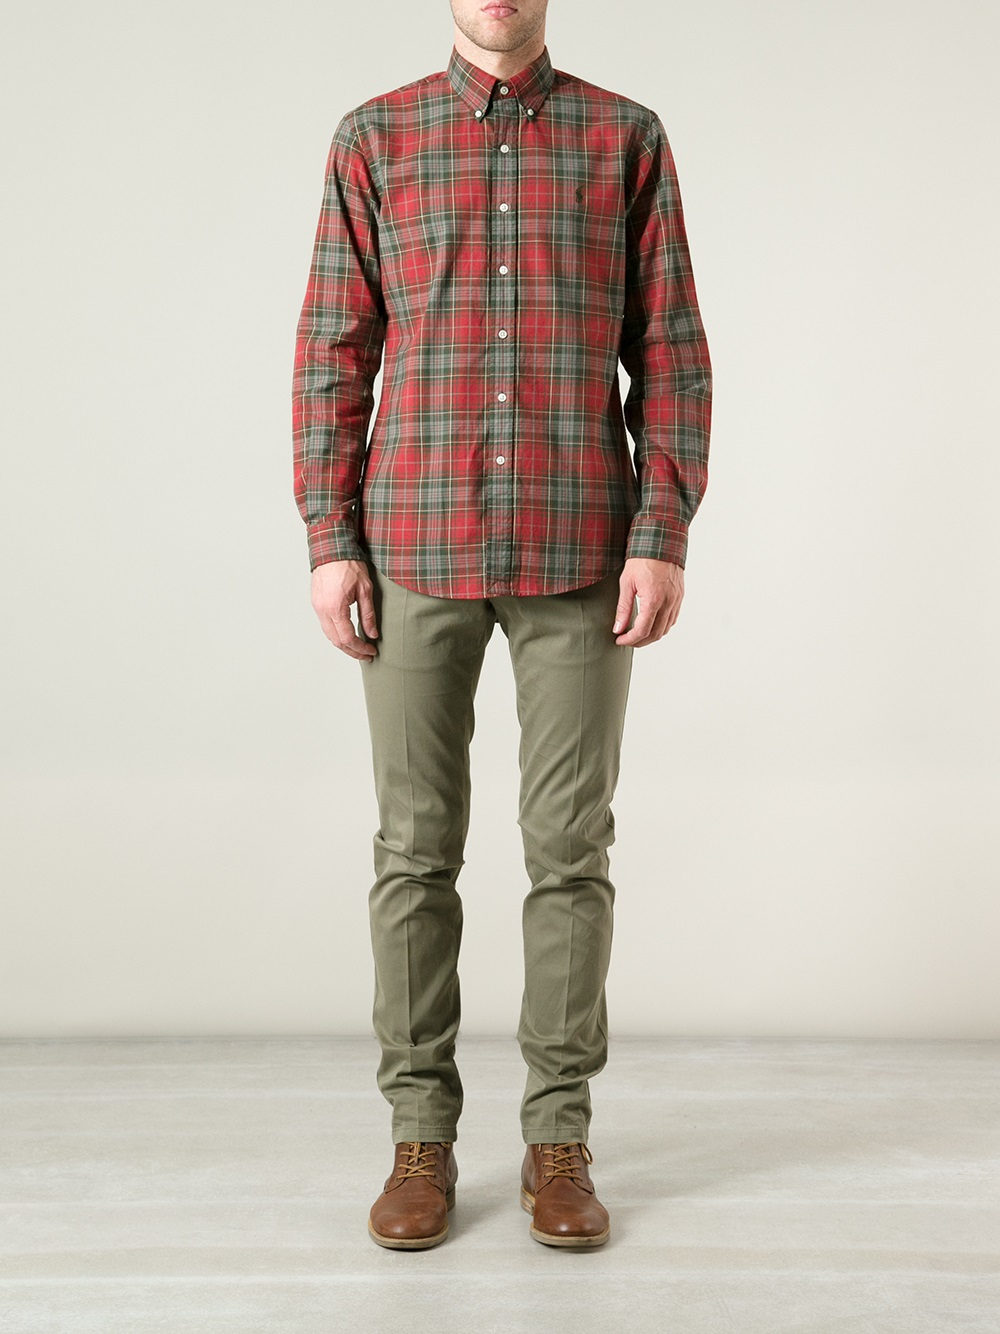 Polo Ralph Lauren Plaid Shirt in Red for Men - Lyst